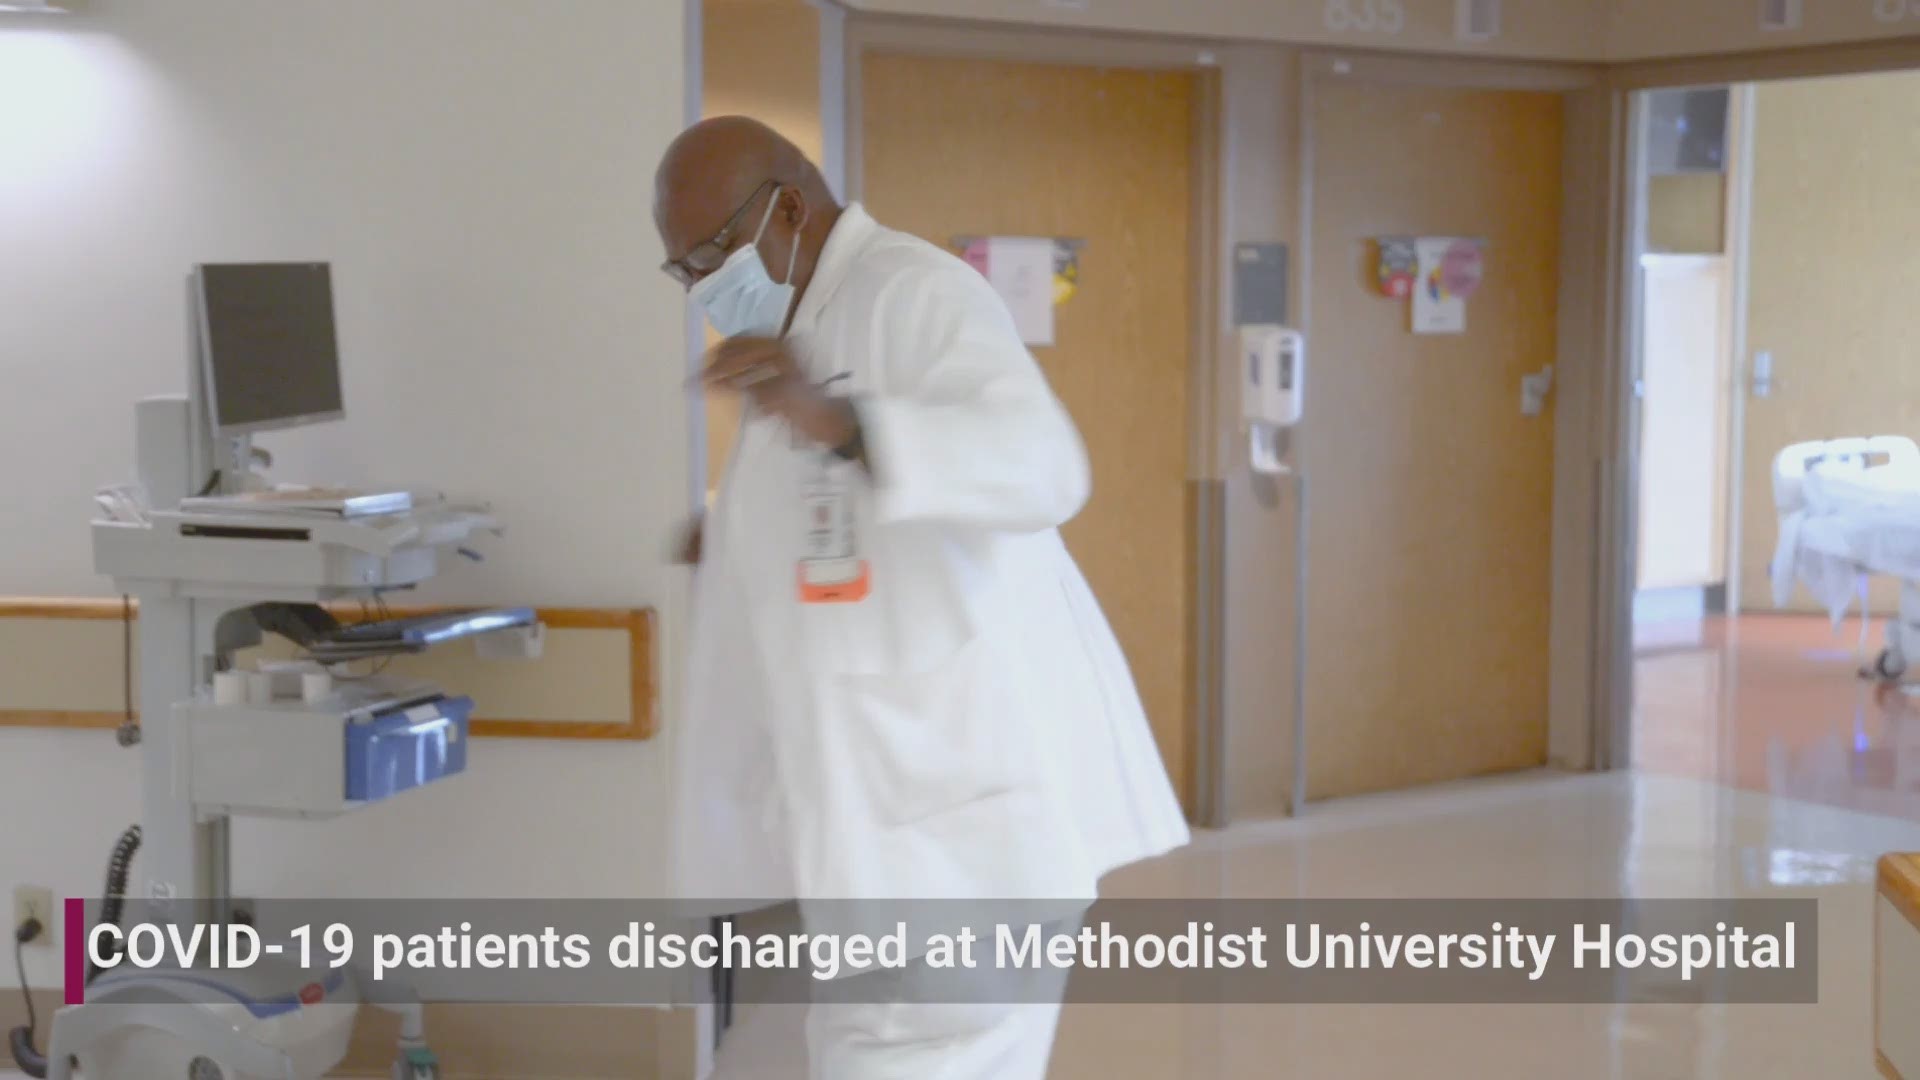 The hospital shared video showing how they celebrate as patients are discharged.